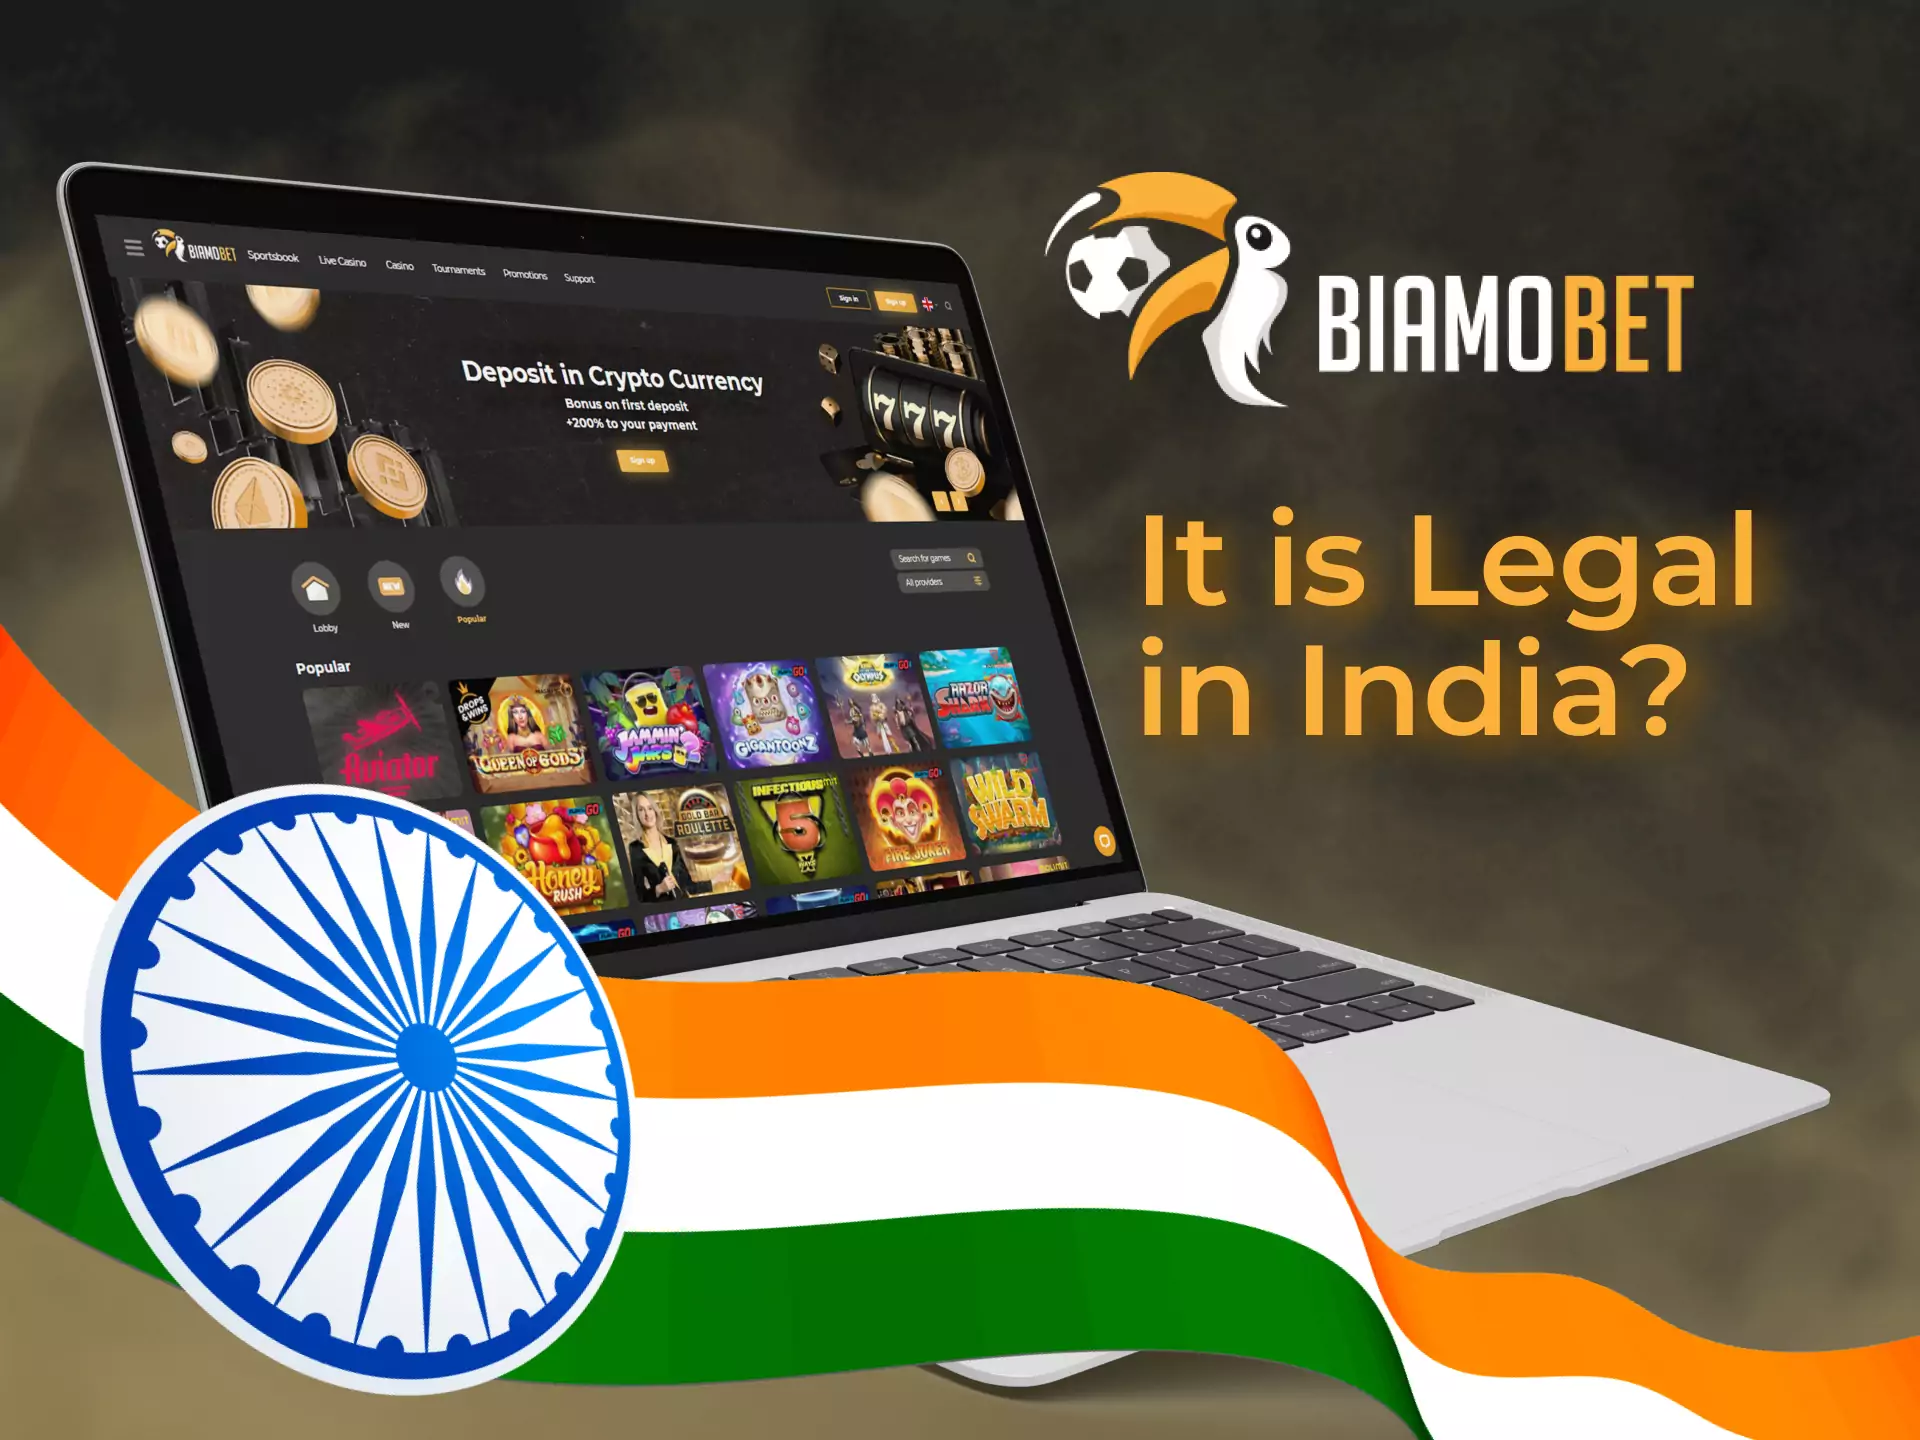 Biamobet works legally in India thanking to the Curacao license.